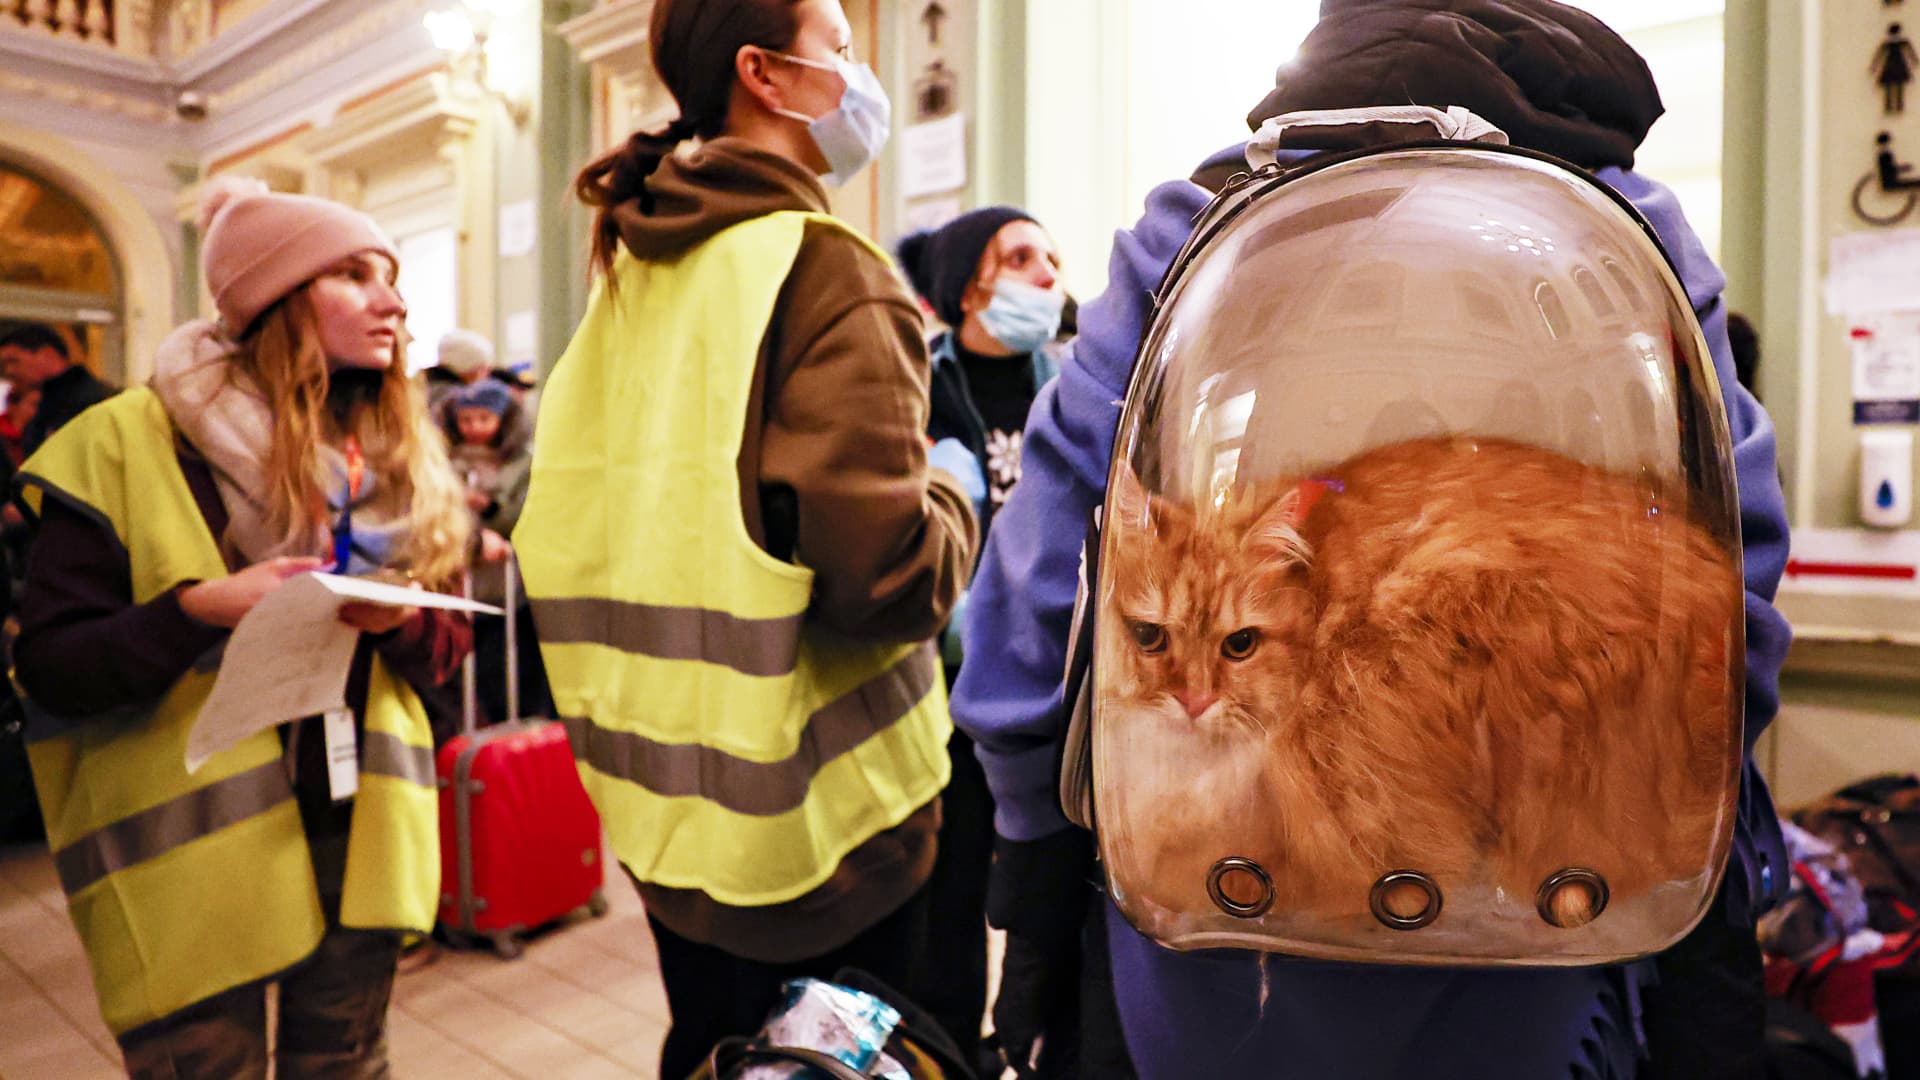 Photo shows a Ukrainian civilian taking shelter with a cat in the backpack at the Przemysl train station, 20 kilometers from the Ukrainian border, in Przemysl, Poland on February 28, 2022.